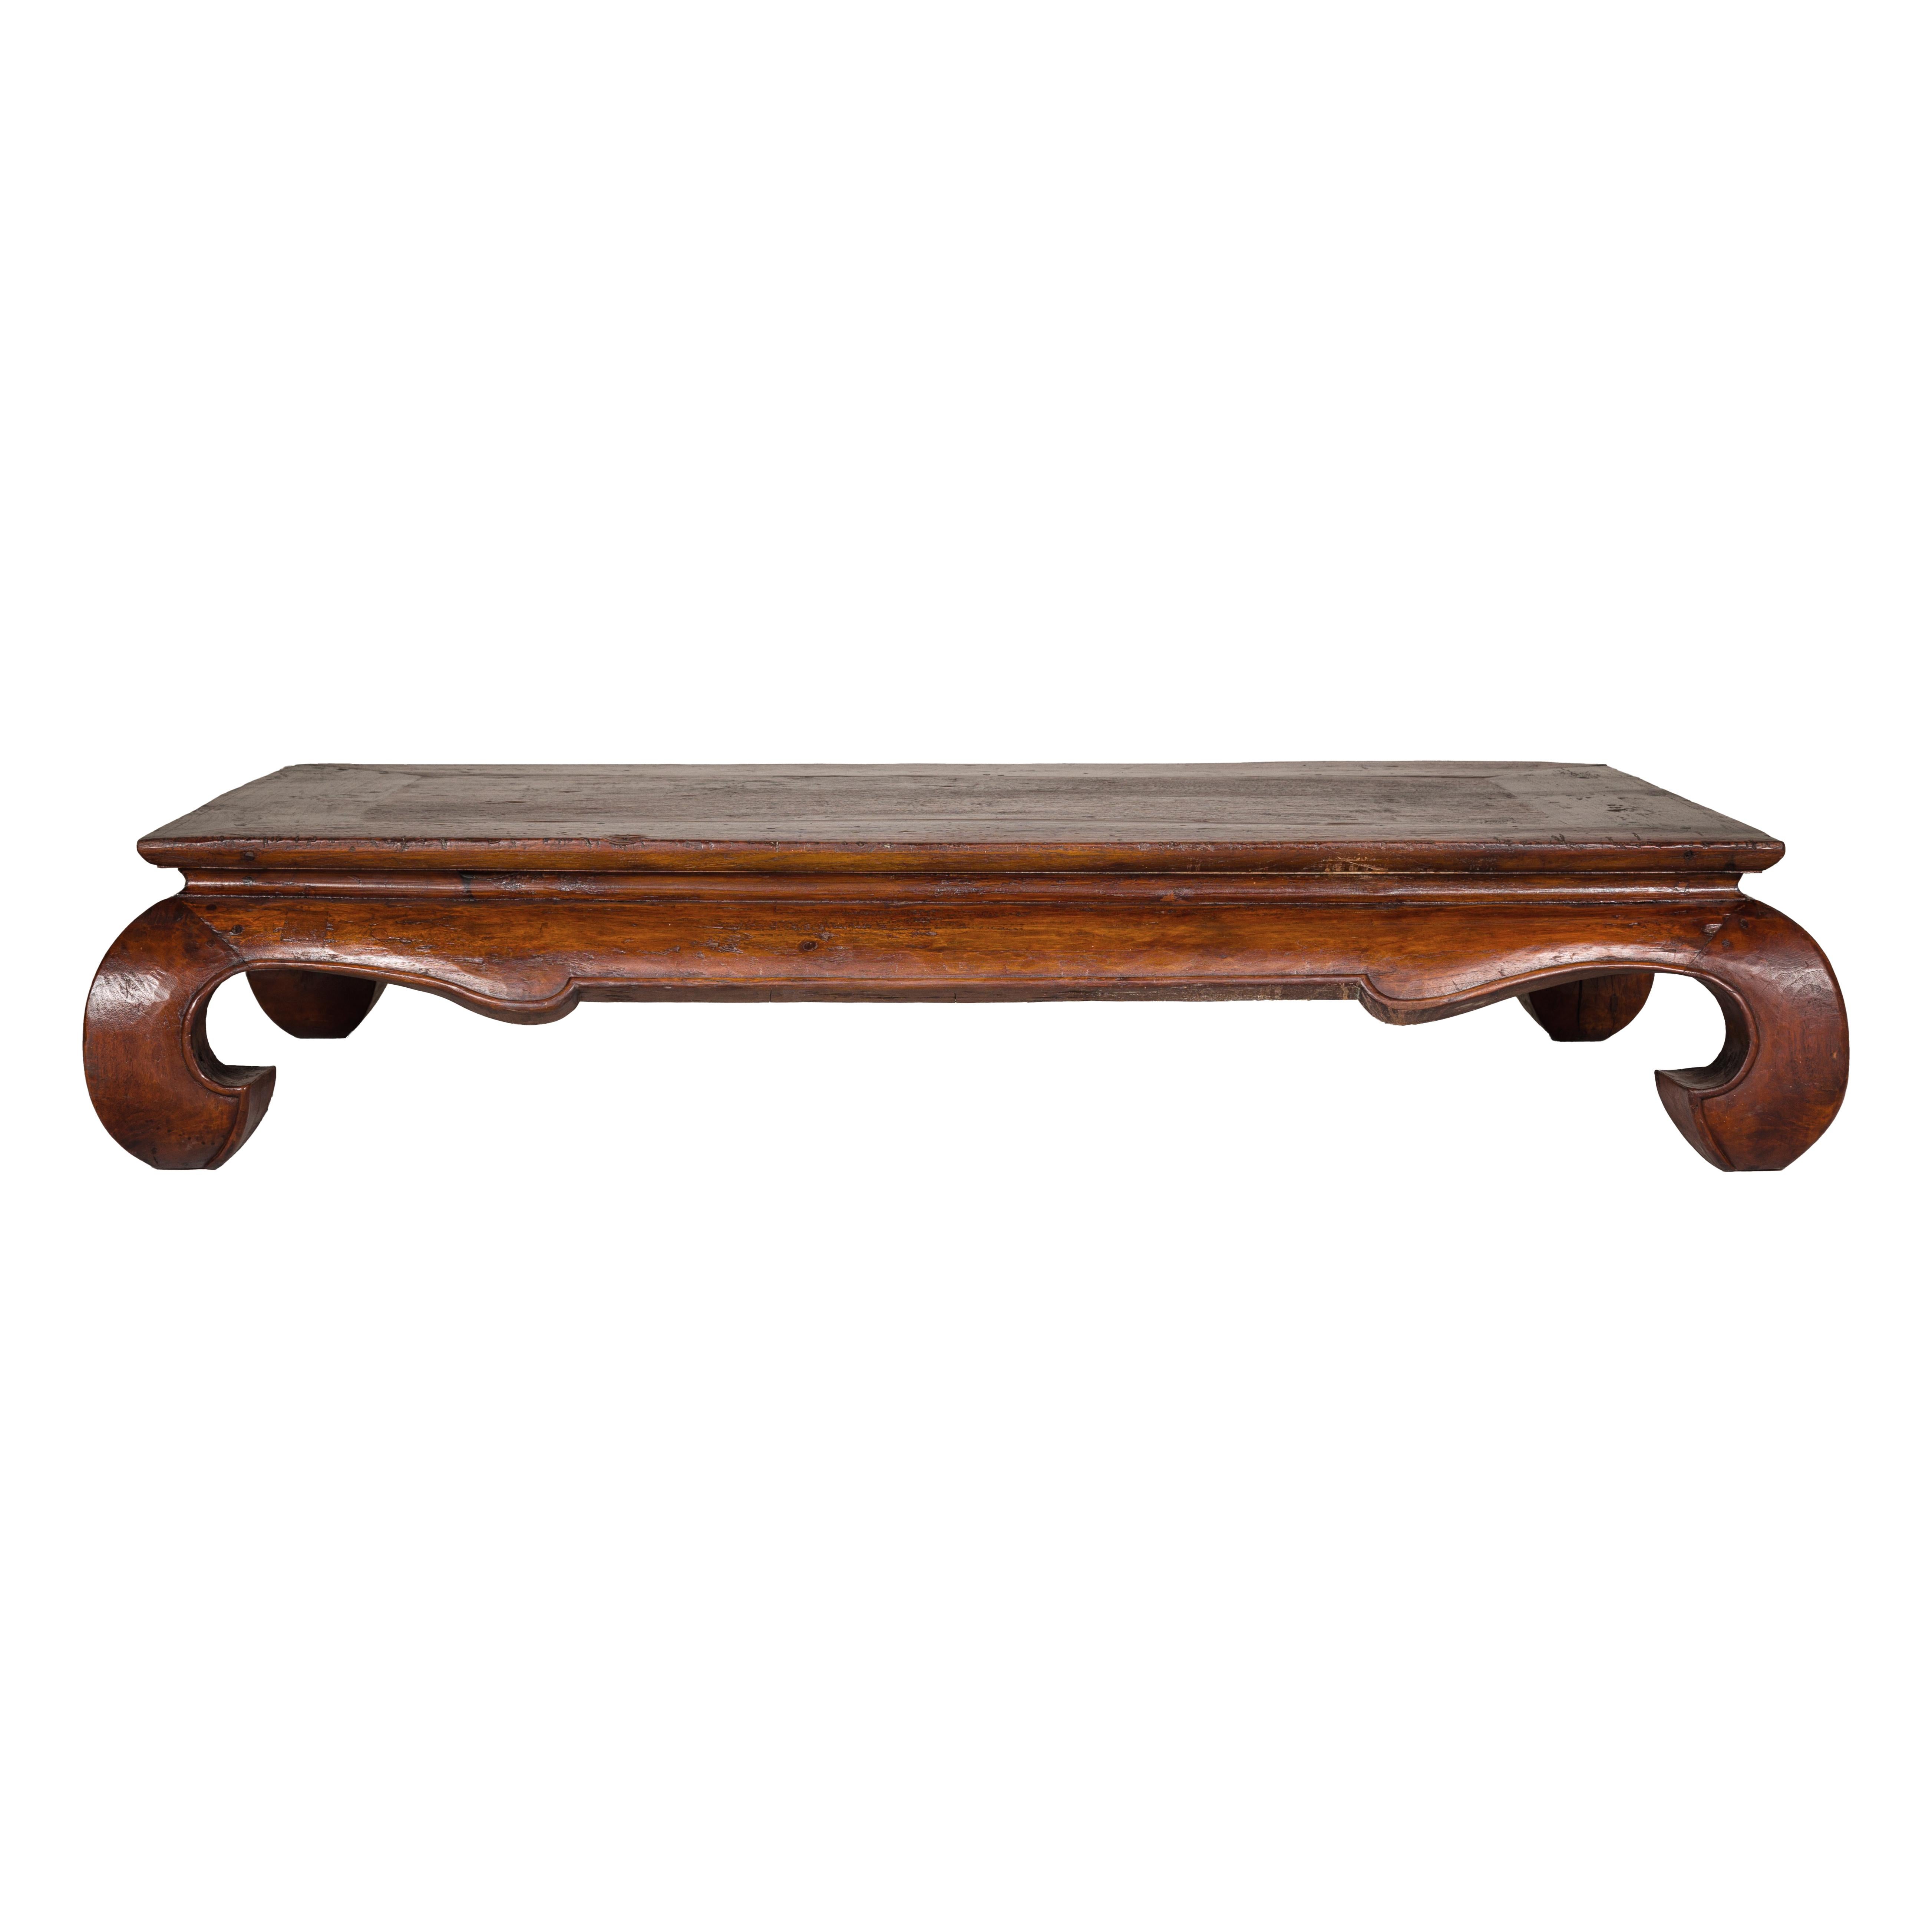 Qing Dynasty 19th Century Chow Leg Kang Table with Weathered Rustic Patina For Sale 14